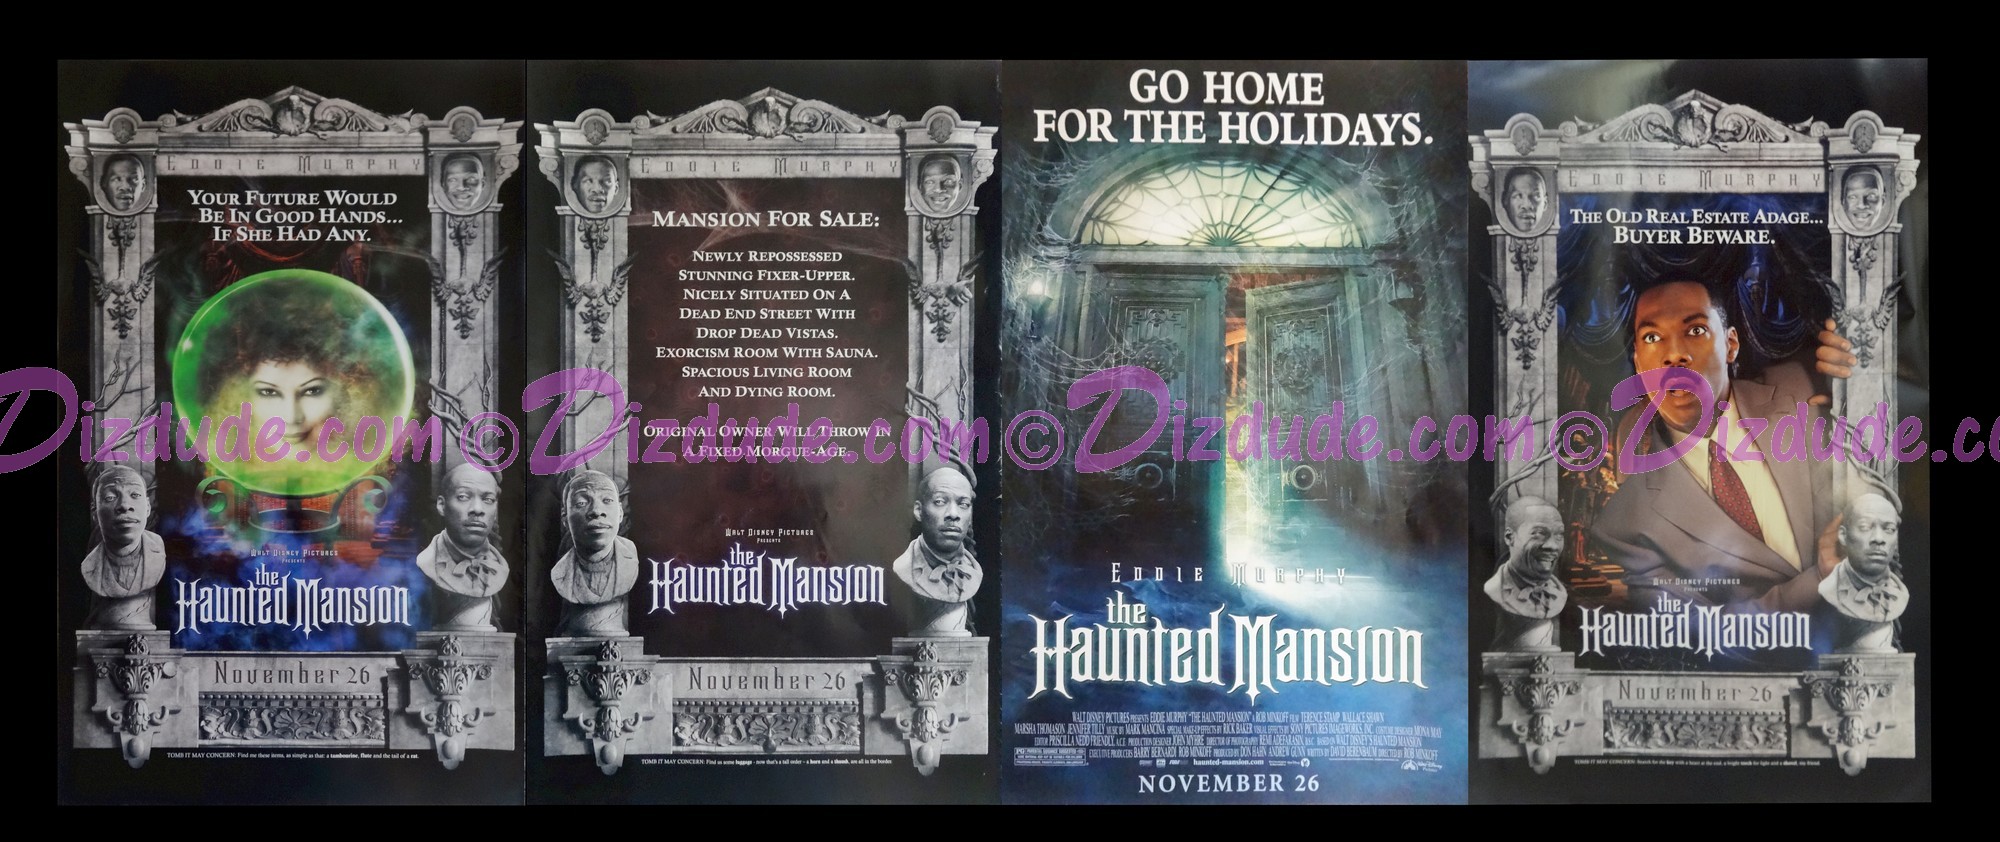 Disney Movie Poster "The Haunted Mansion" From 2003